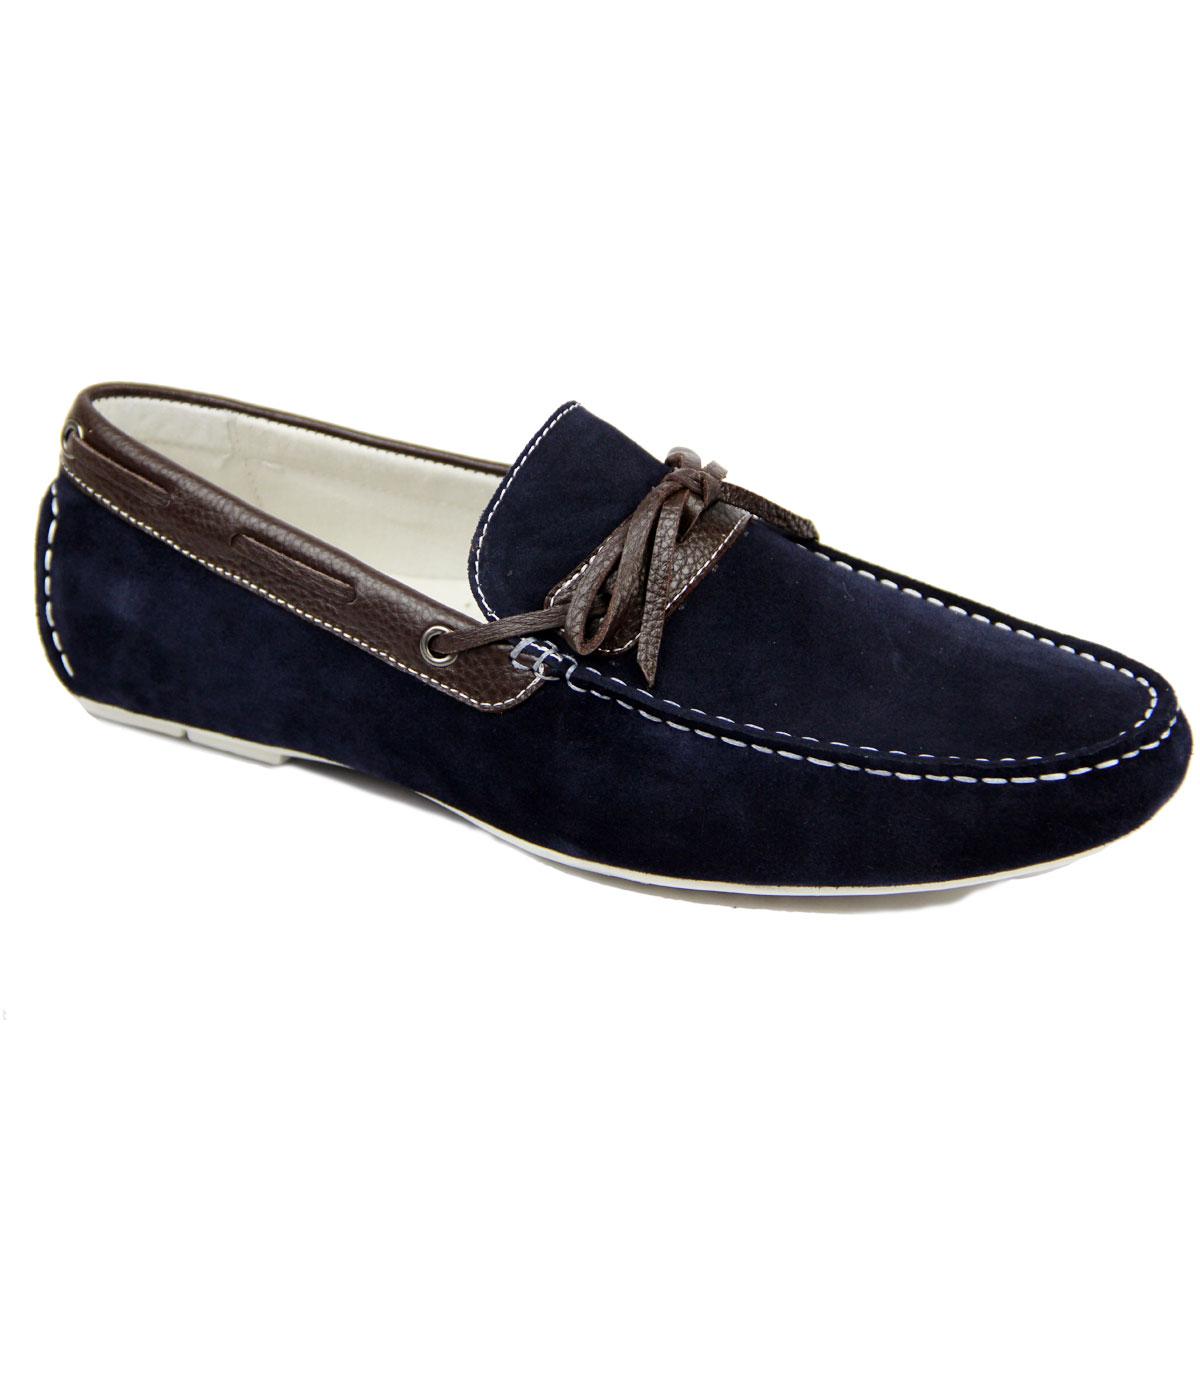 PAOLO VANDINI Taxbury Retro Mod Suede Loafers in Navy